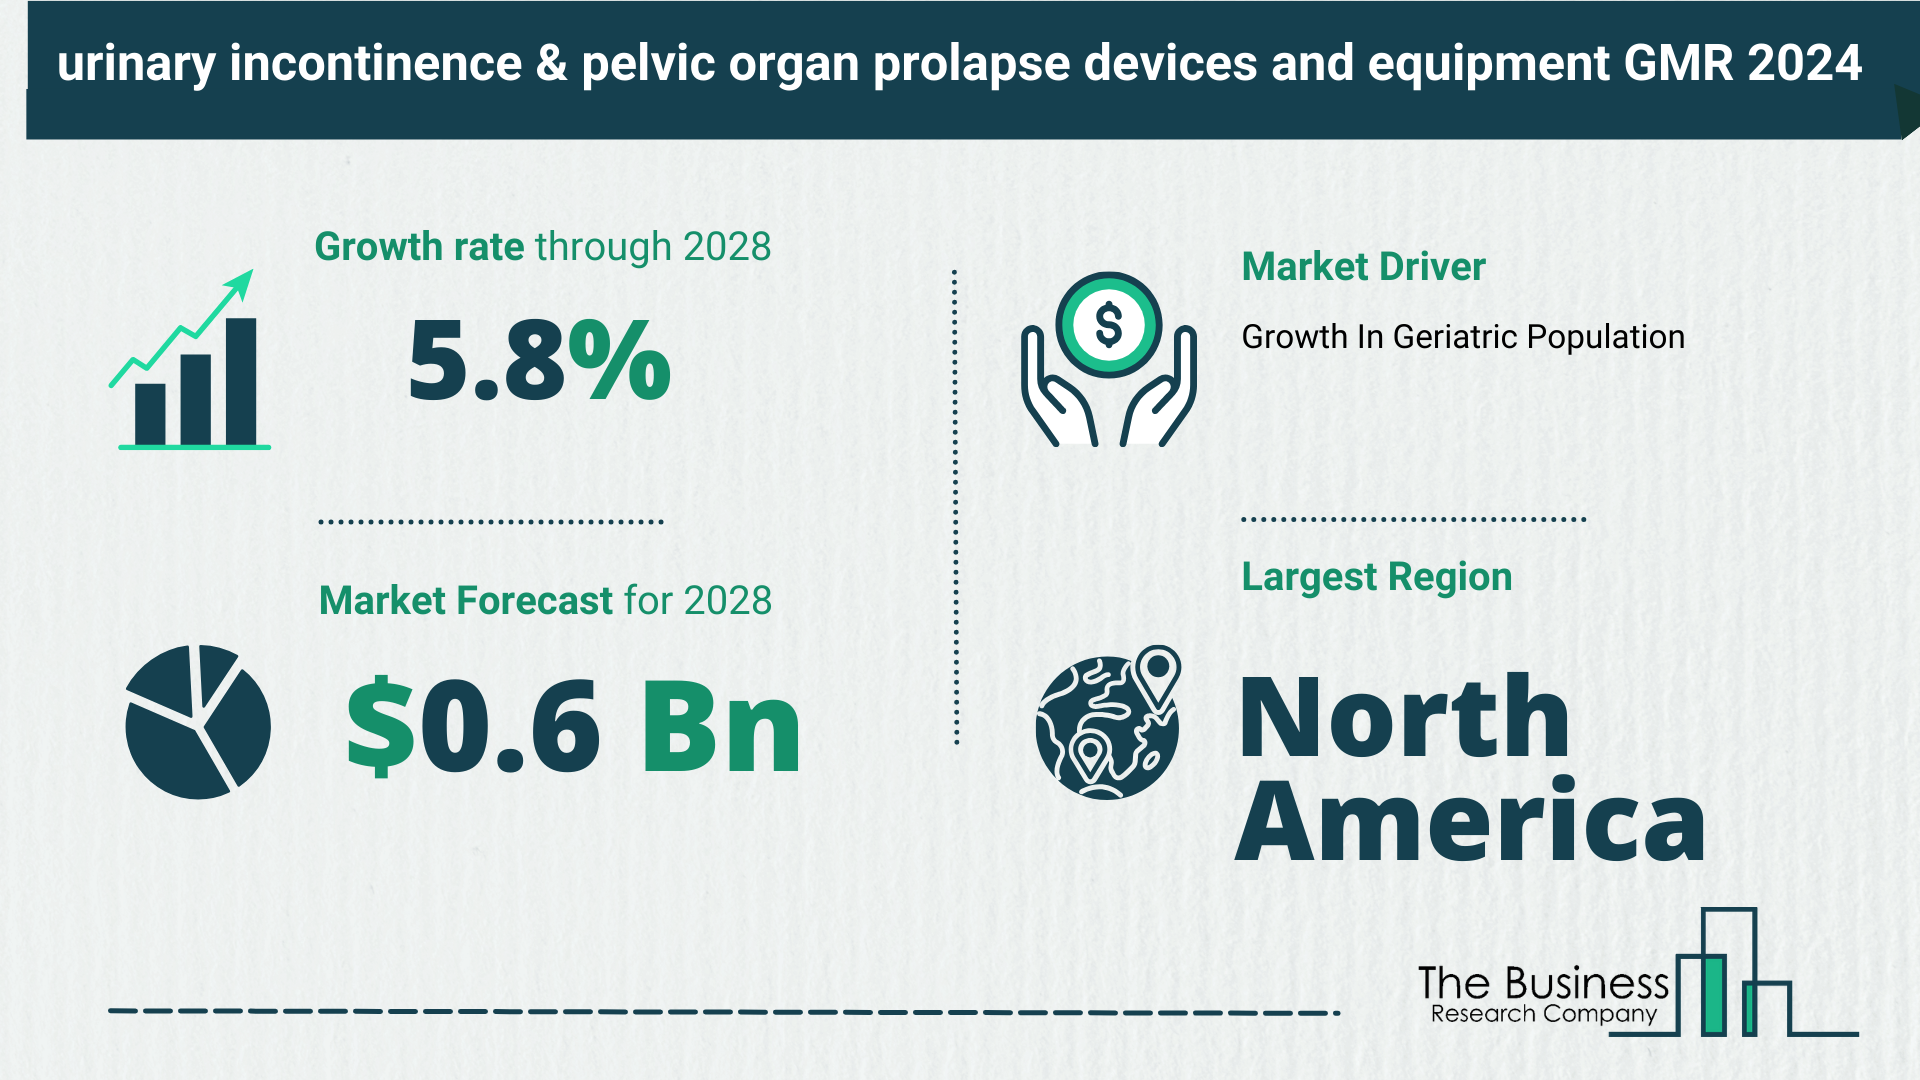 Global Urinary Incontinence & Pelvic Organ Prolapse Devices And Equipment Market